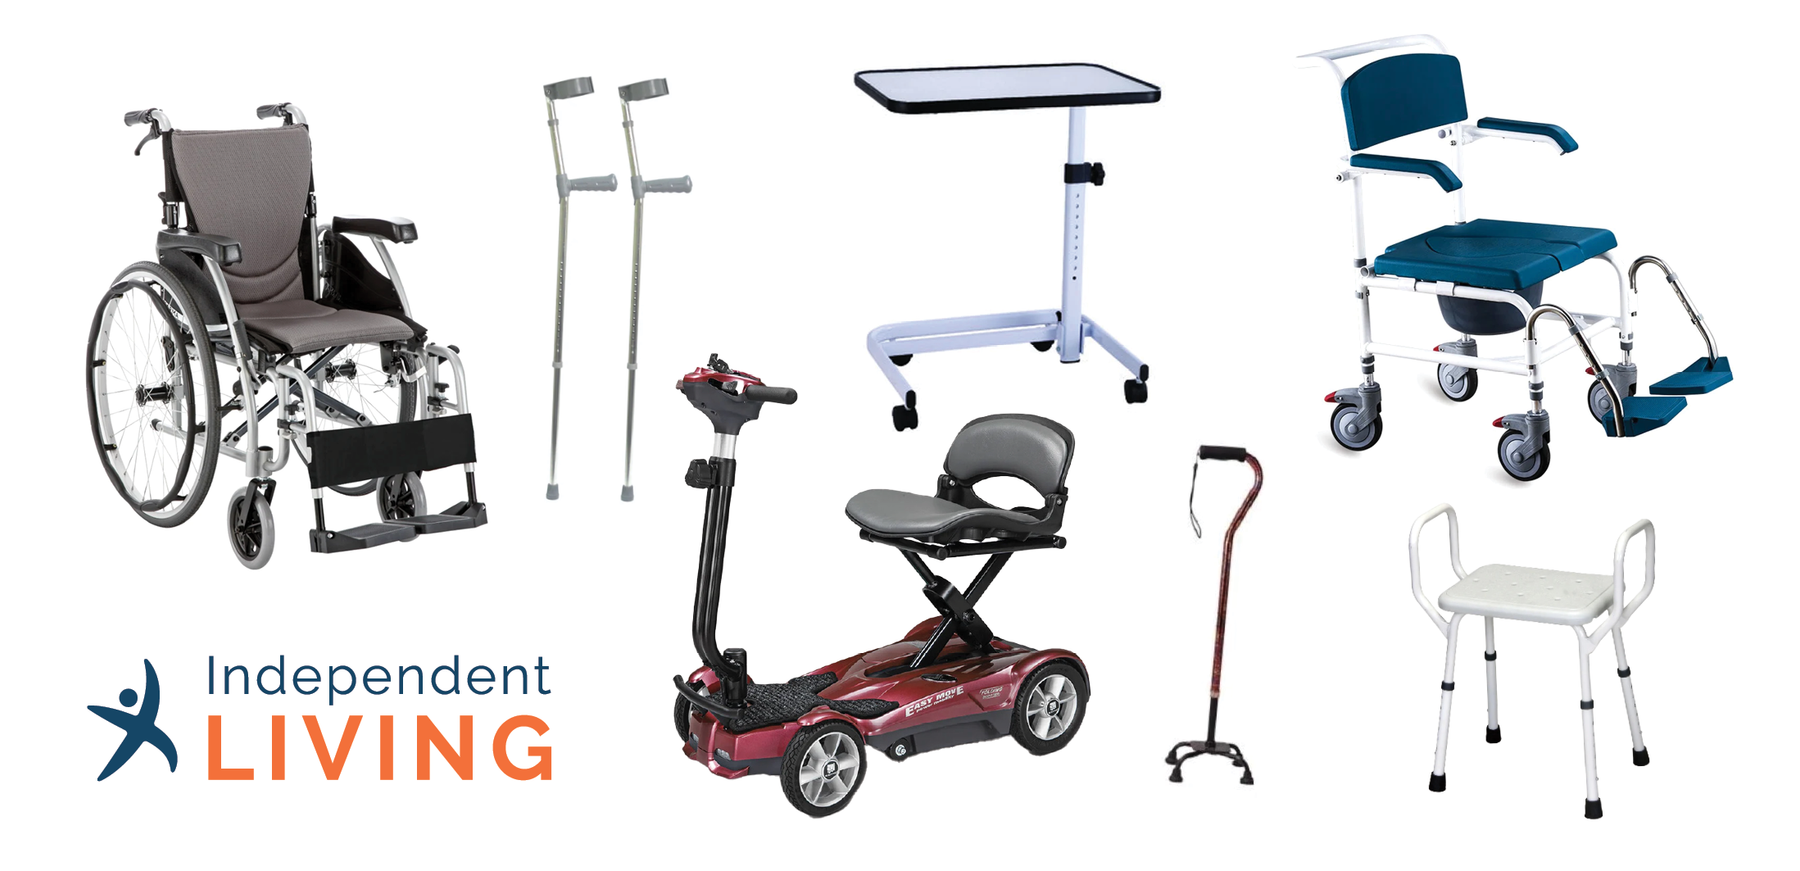 To Hire or Buy Mobility Equipment?